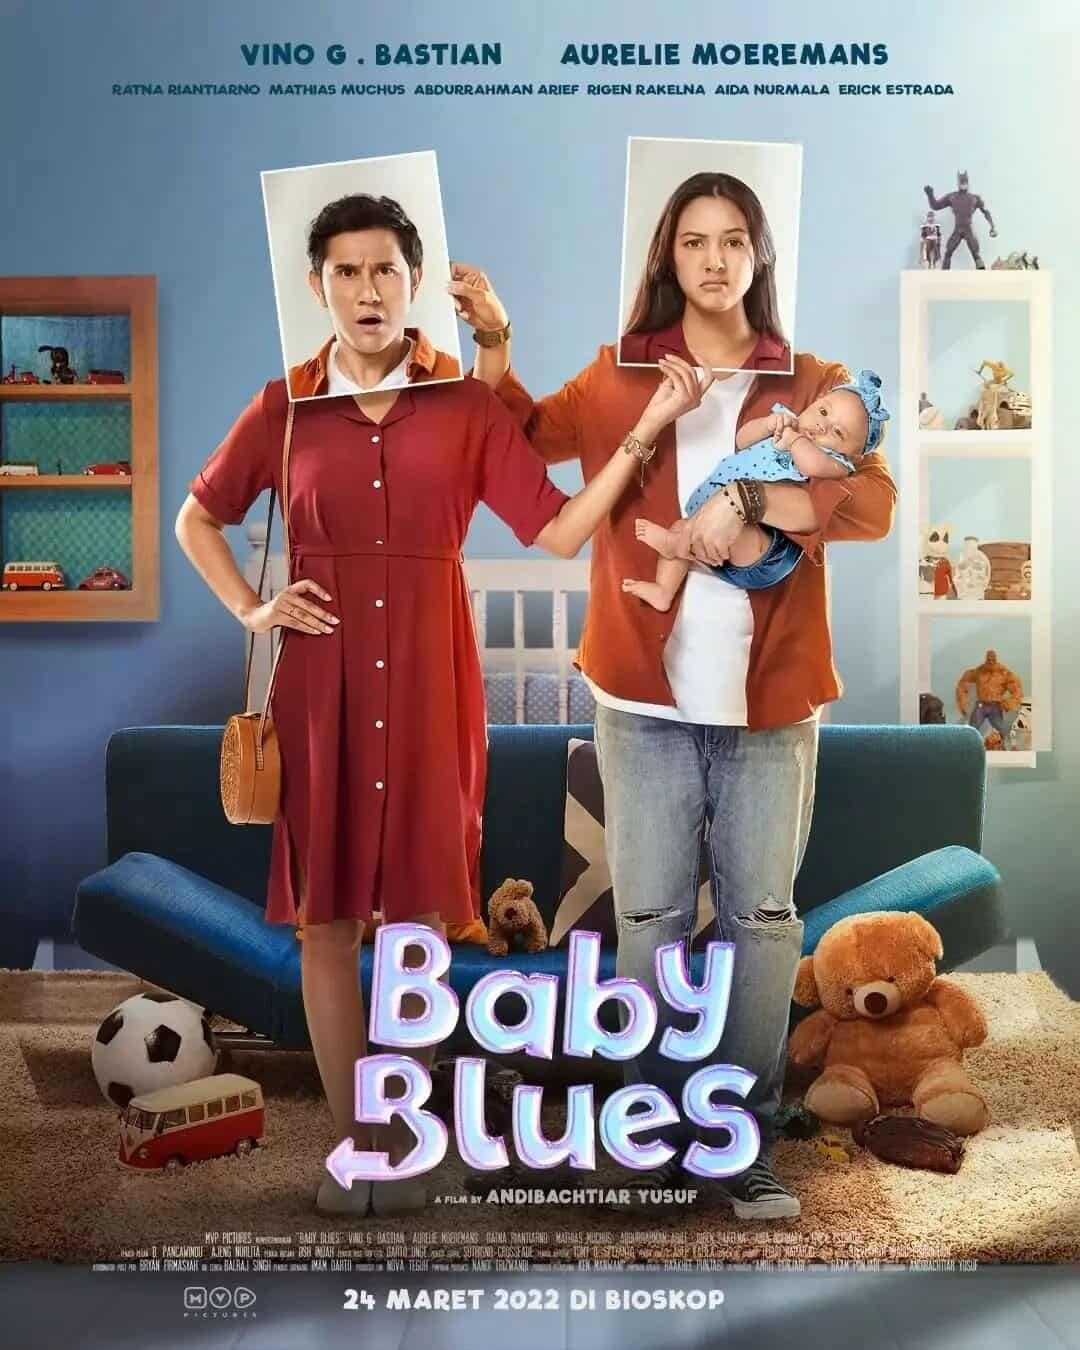 Baby Blues - Sinopsis, Pemain, OST, Review